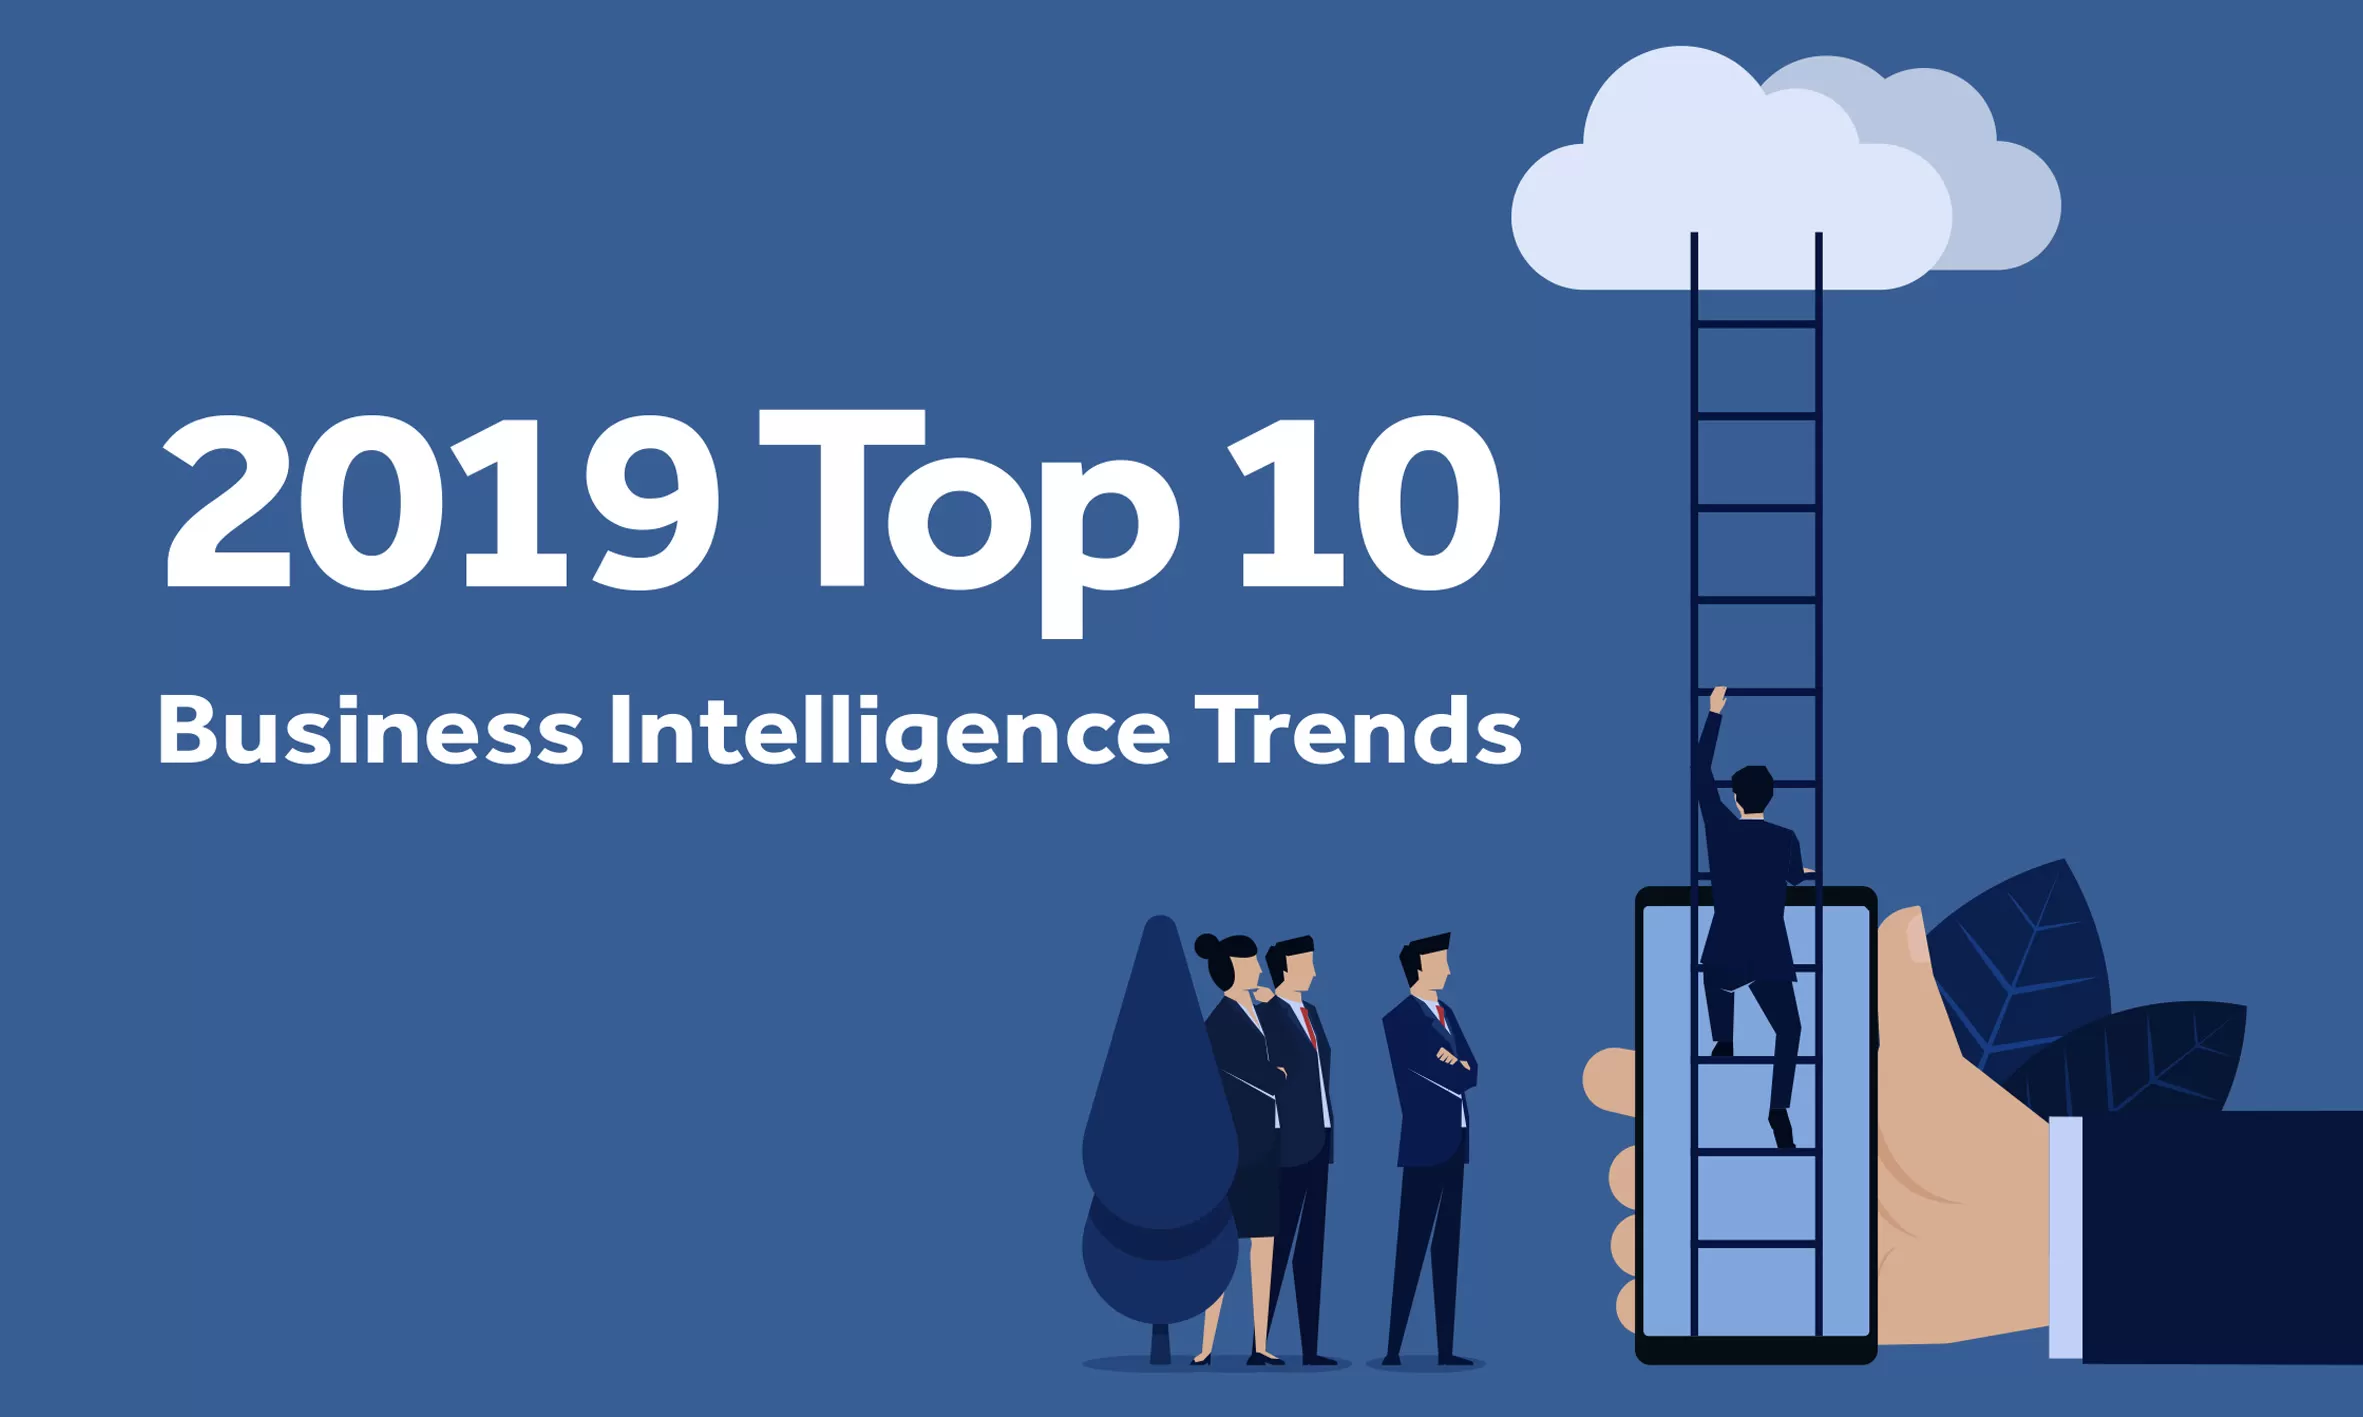 2019 Top 10 Business Intelligence Trends